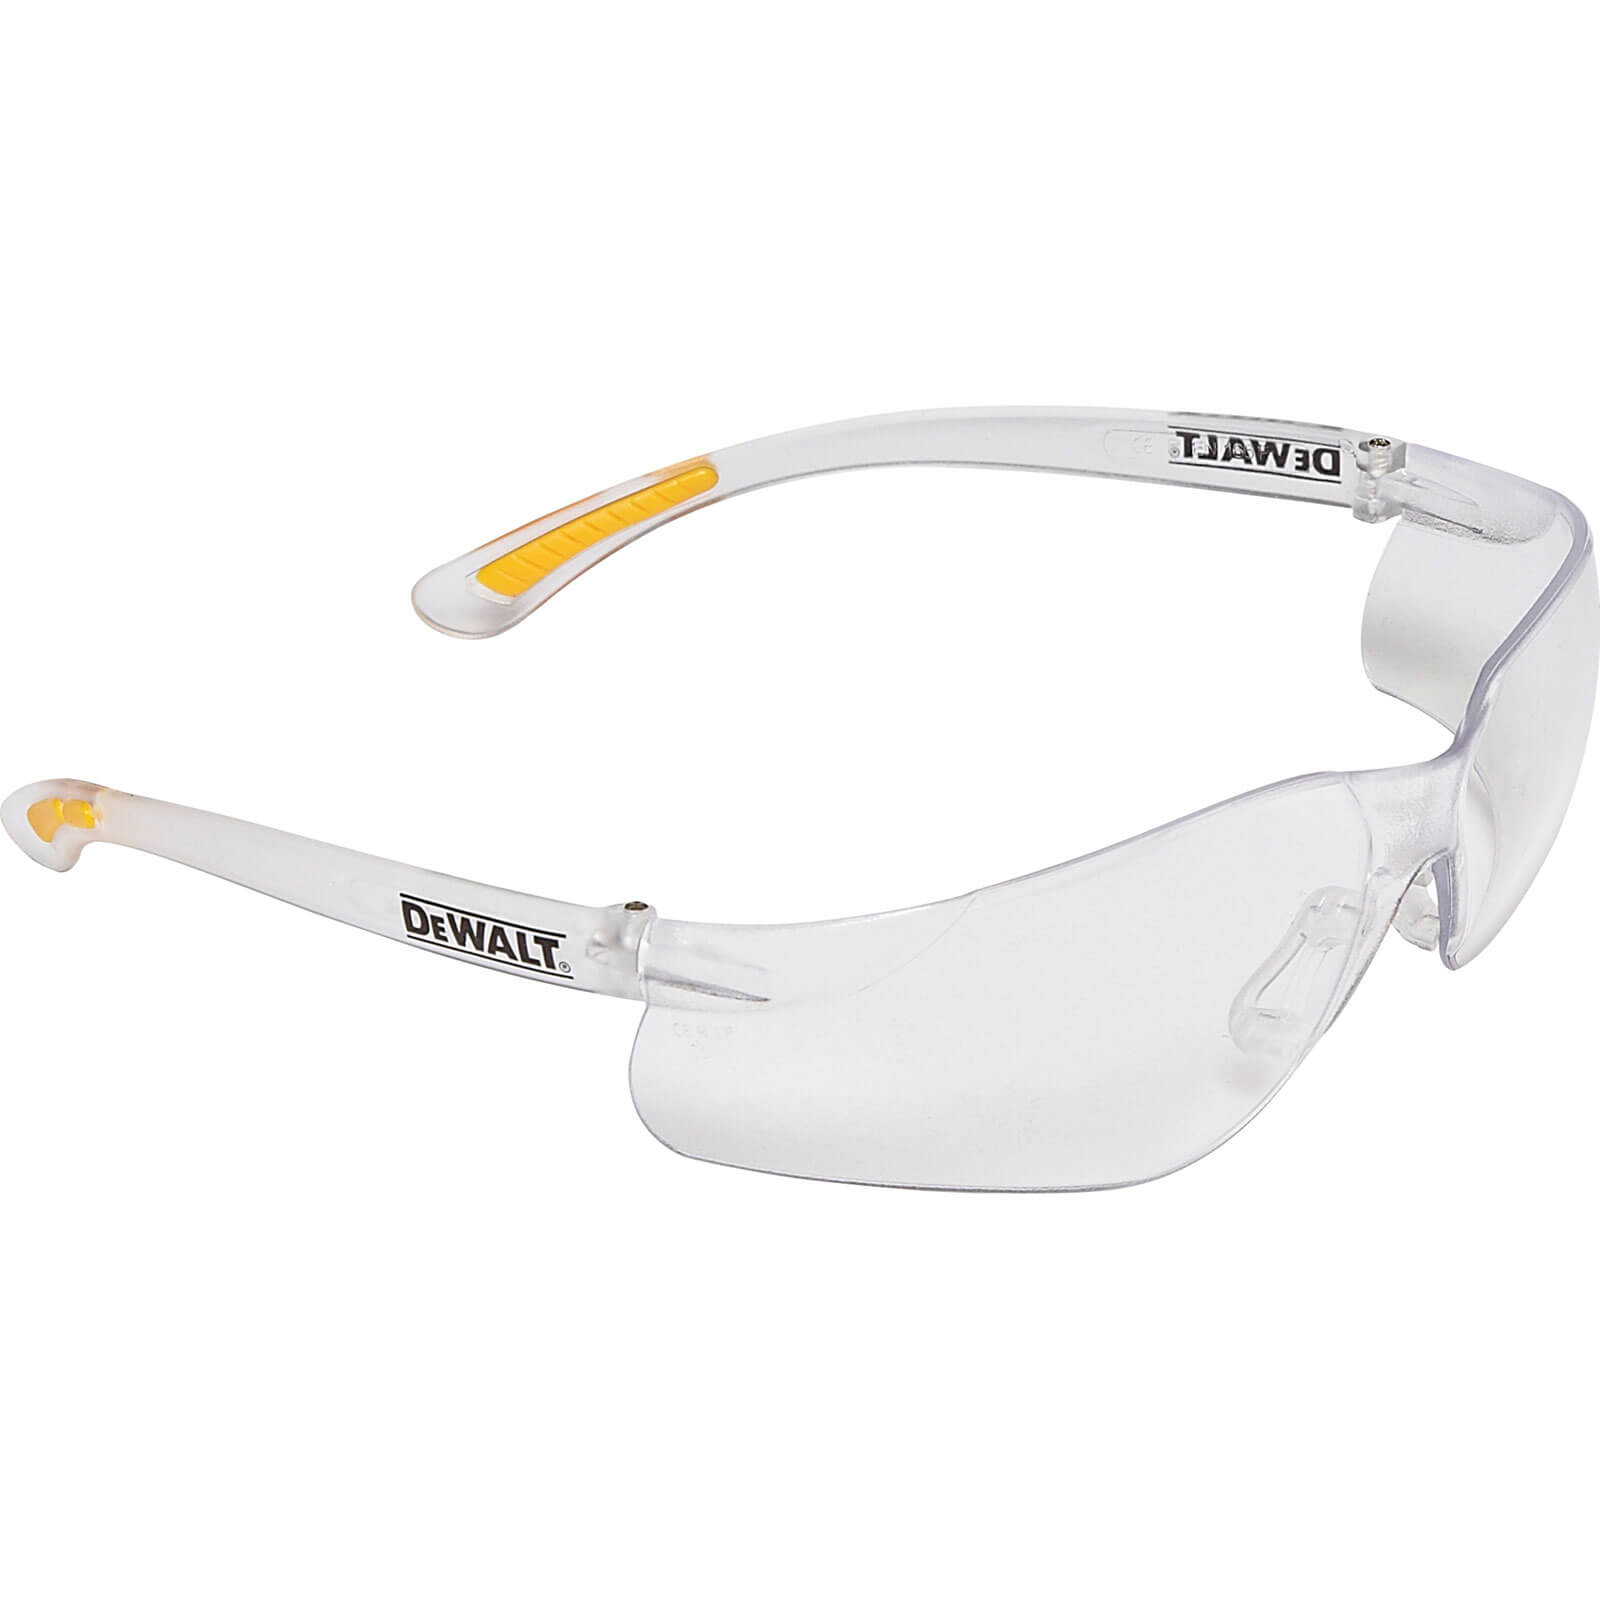 DeWalt Contractor Pro Safety Glasses Clear